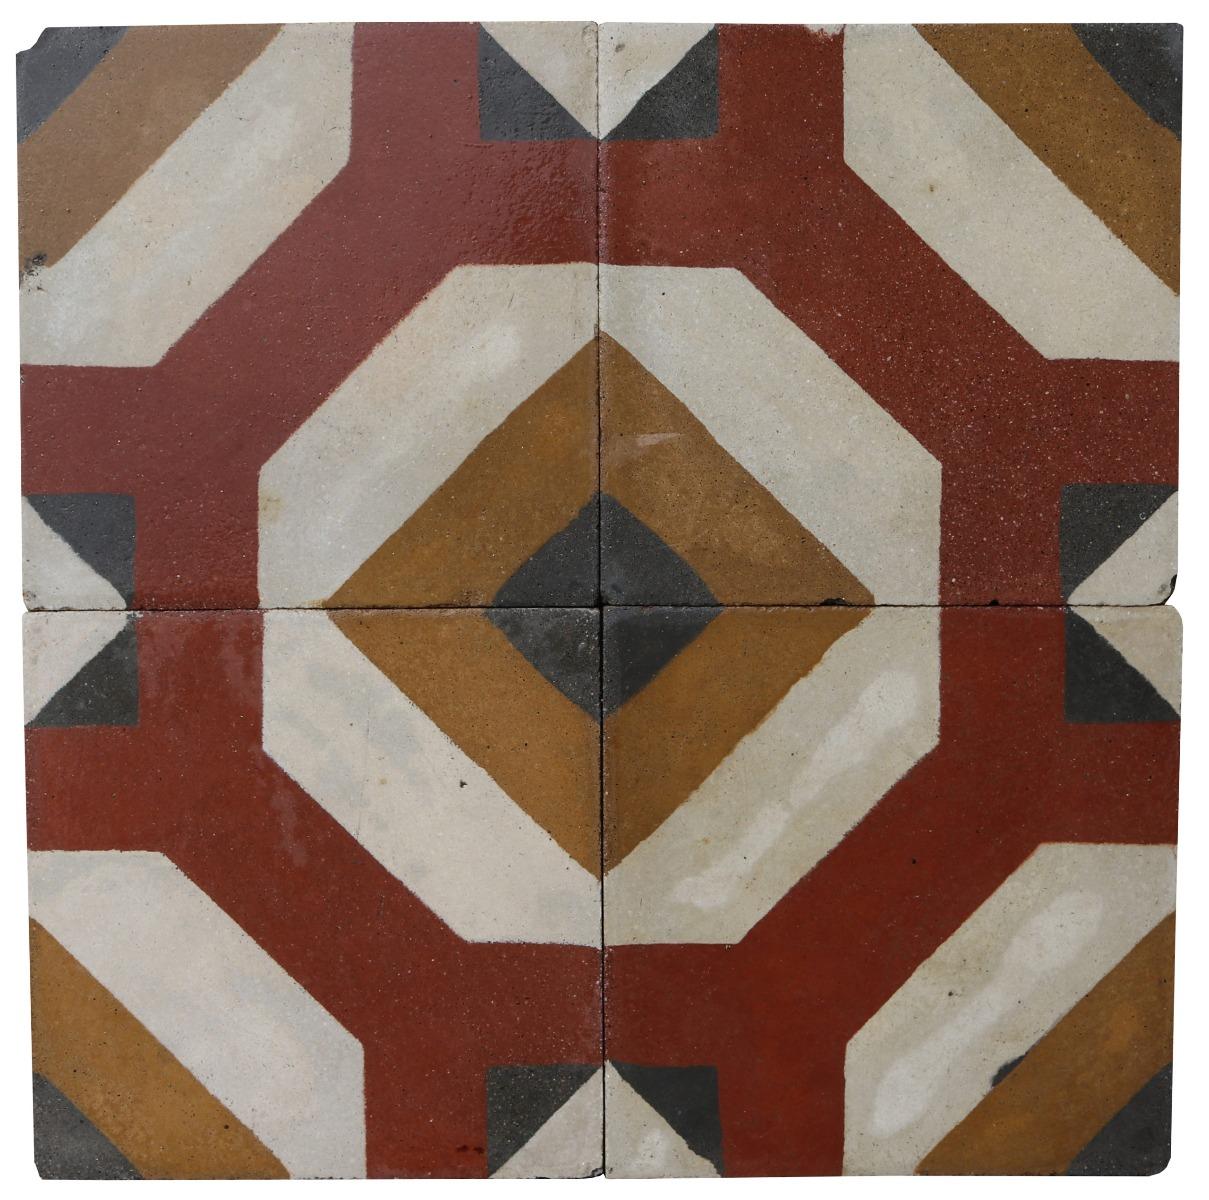 A batch of 49 reclaimed encaustic cement floor tiles. These tiles will cover 1.96 m2 or 21 sq. ft. They are suitable for use on floors or walls.

Weathered surfaces and small chips associated with transport and storage. Unused. Good overall